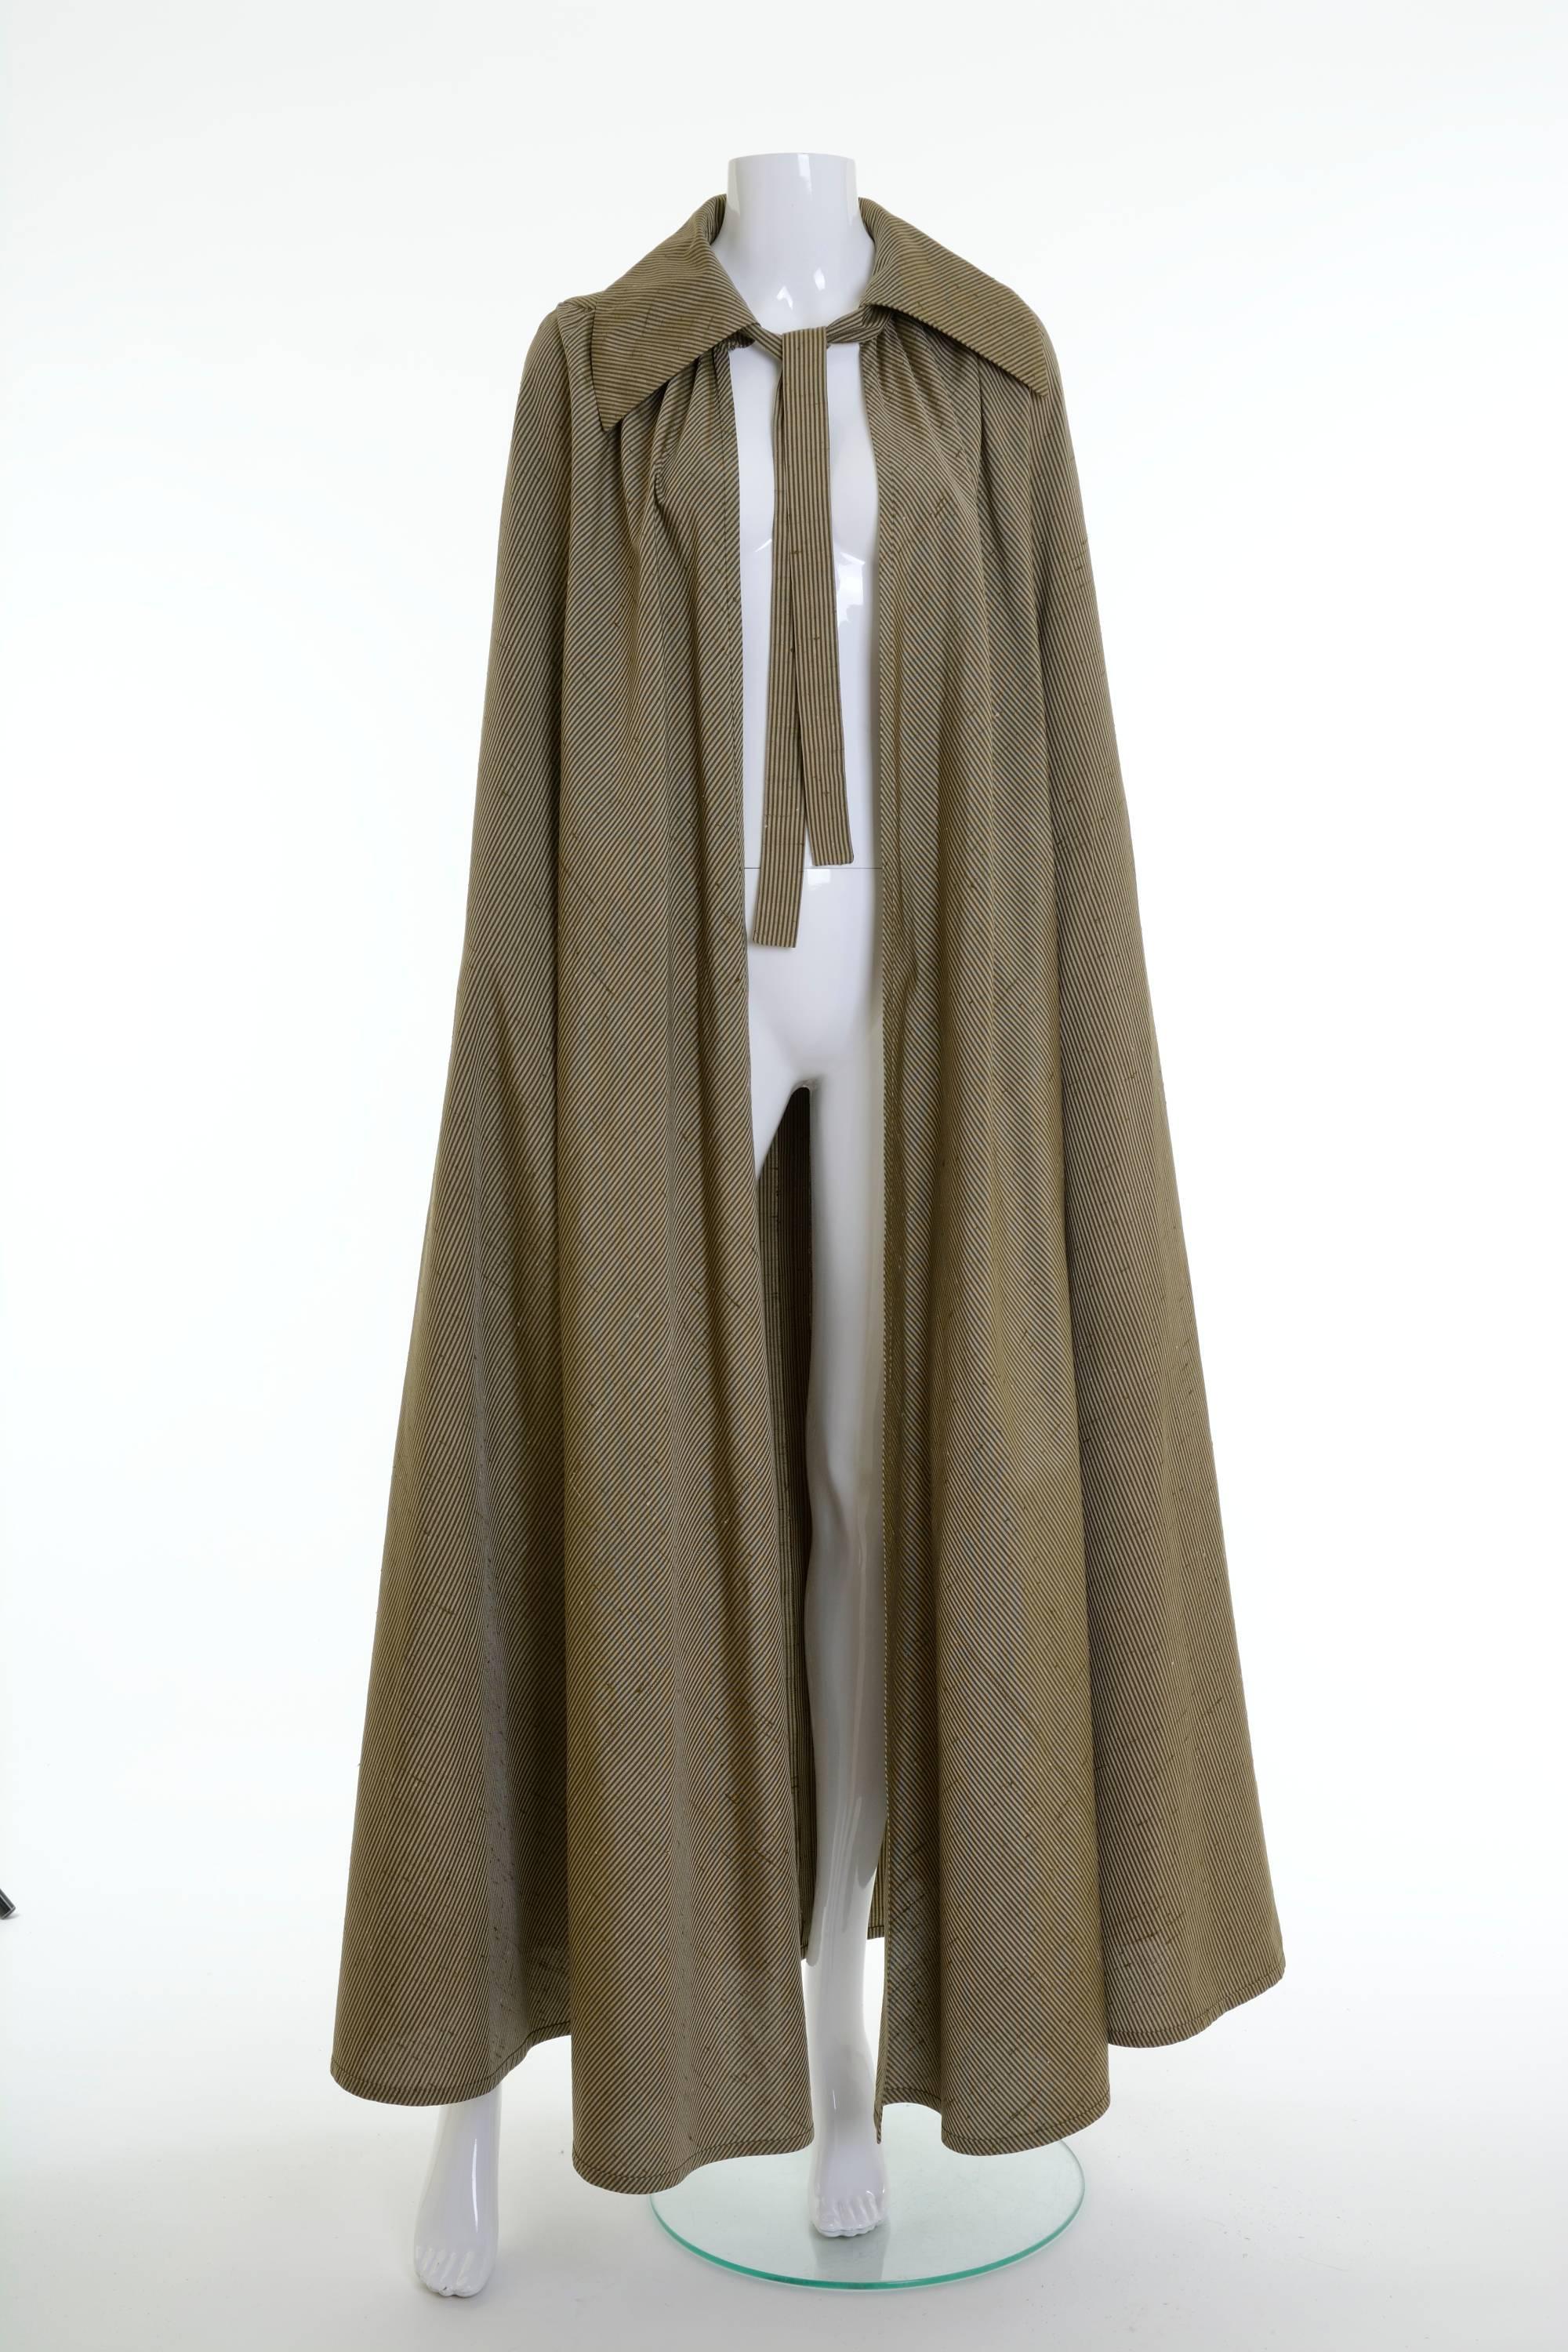 This fabulous Mila Shön 2 pc set is in olive green striped print silk fabric. The long pleateds skirt has two large frontal pockets, back zip and hooks closure and is satin lined. The long cape has tie collar.

Excellent vintage condition

Label: